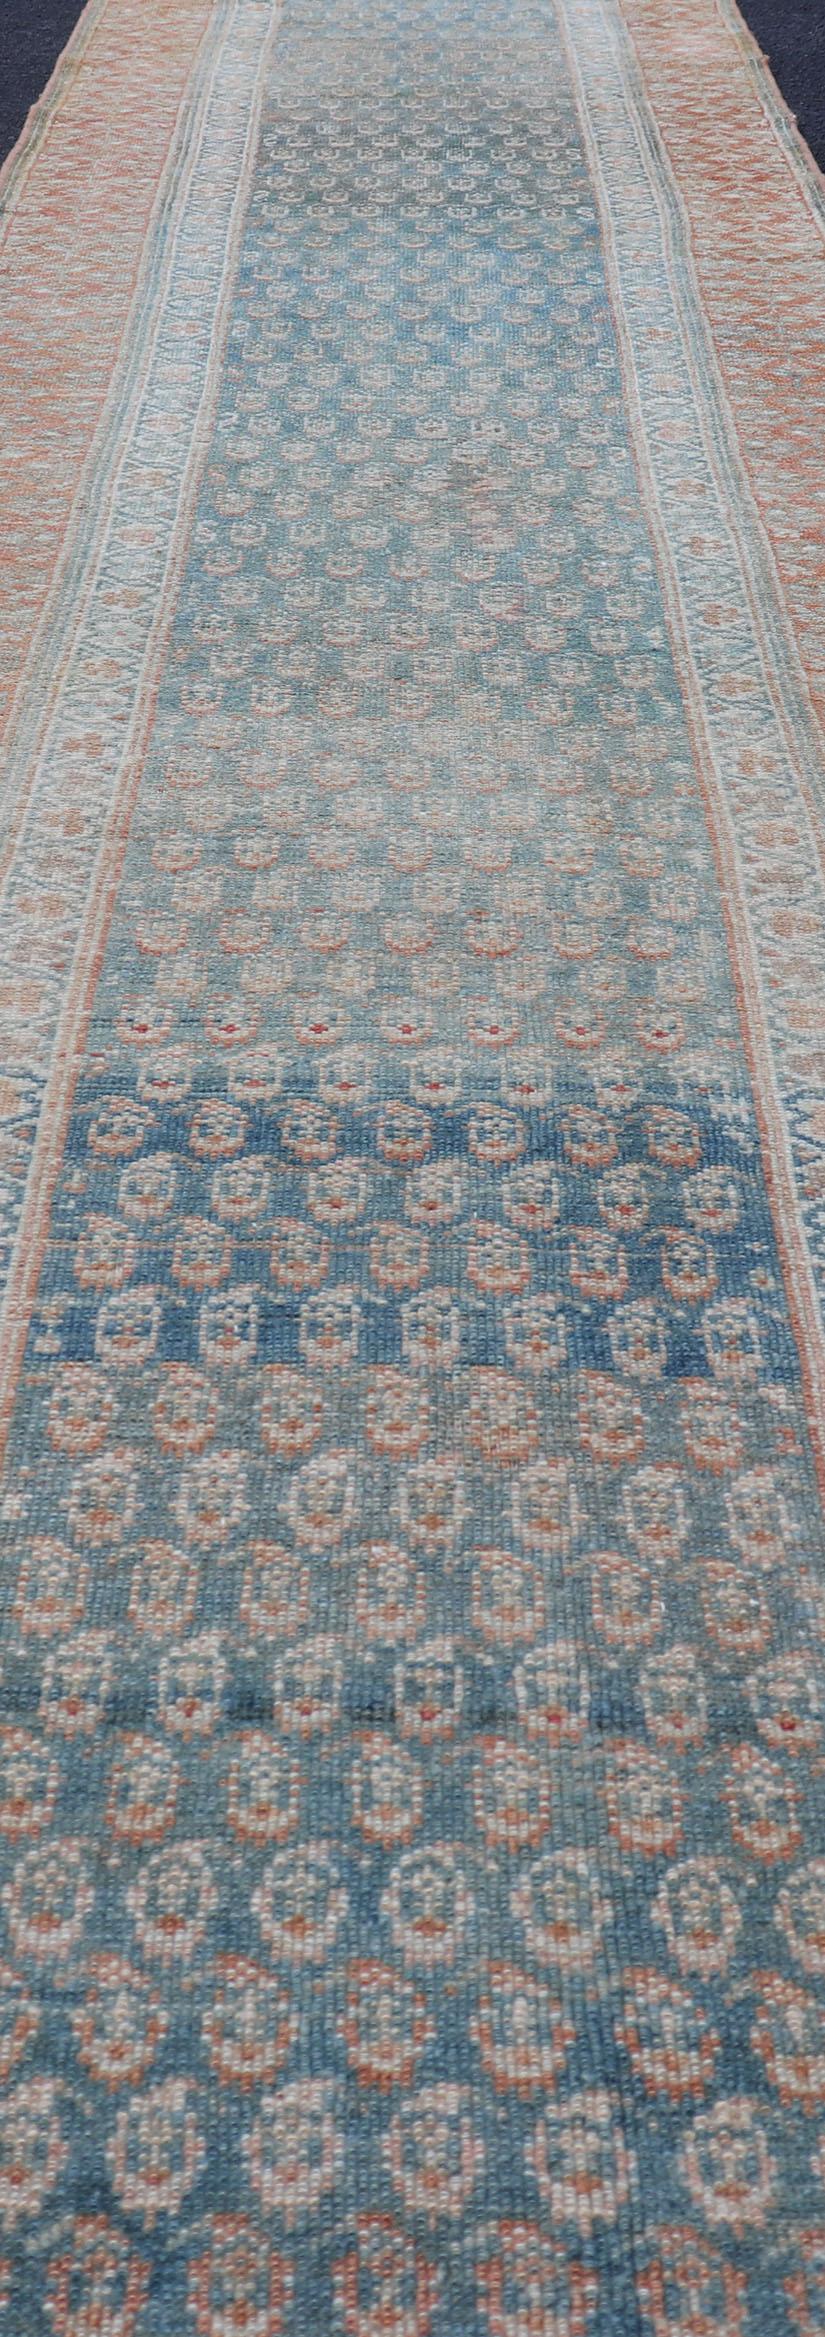 Paisley Field Antique Persian Kurdish Runner in Soft Teal Colors & Orange For Sale 4